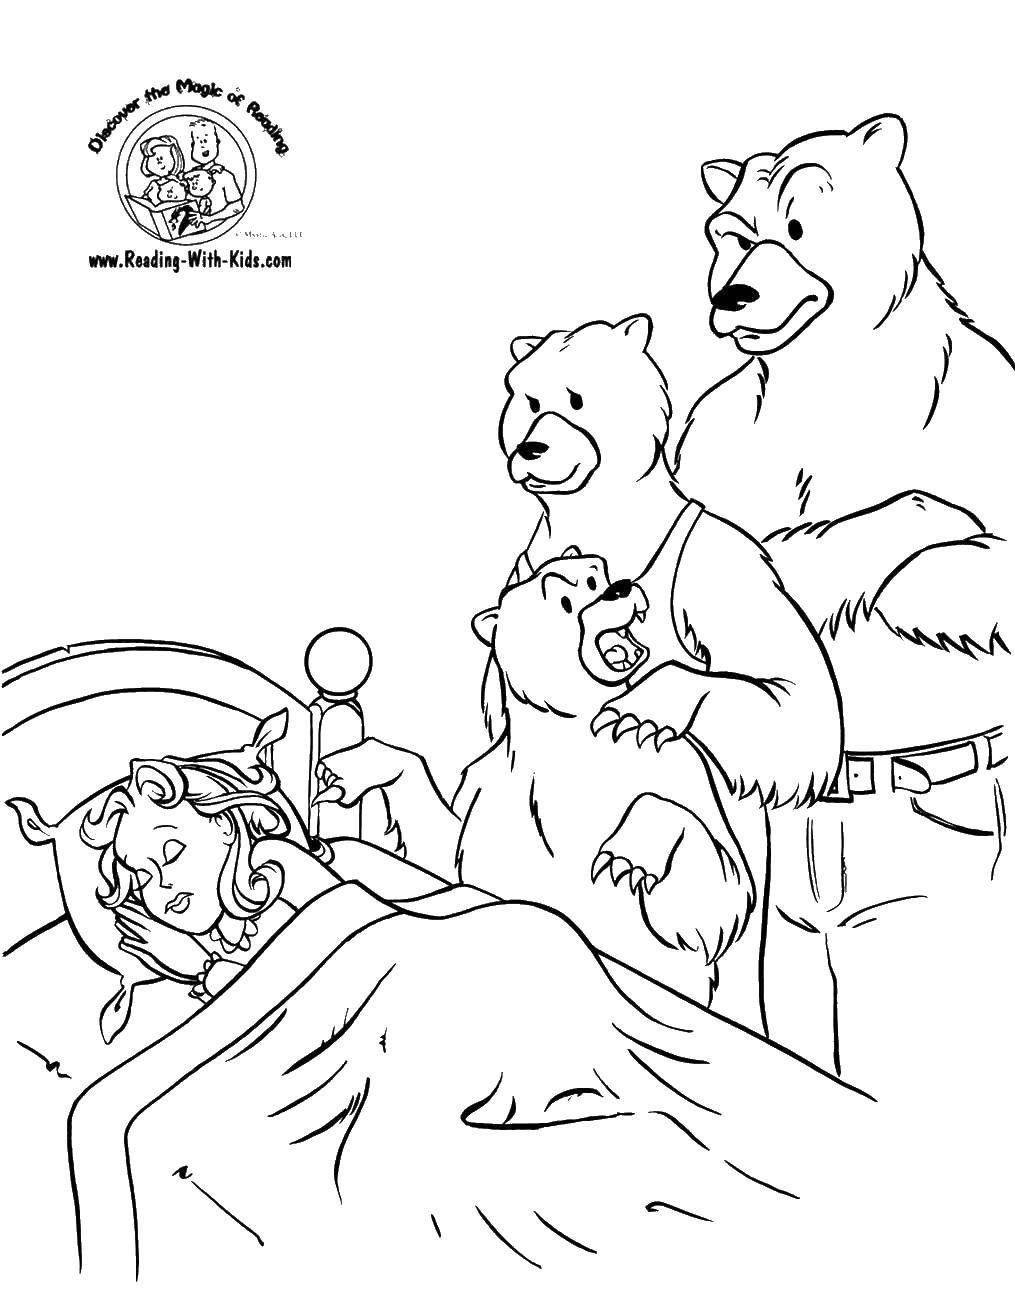 Coloring Mary fell asleep at home for the bears. Category Fairy tales. Tags:  Tales, The Three Bears.